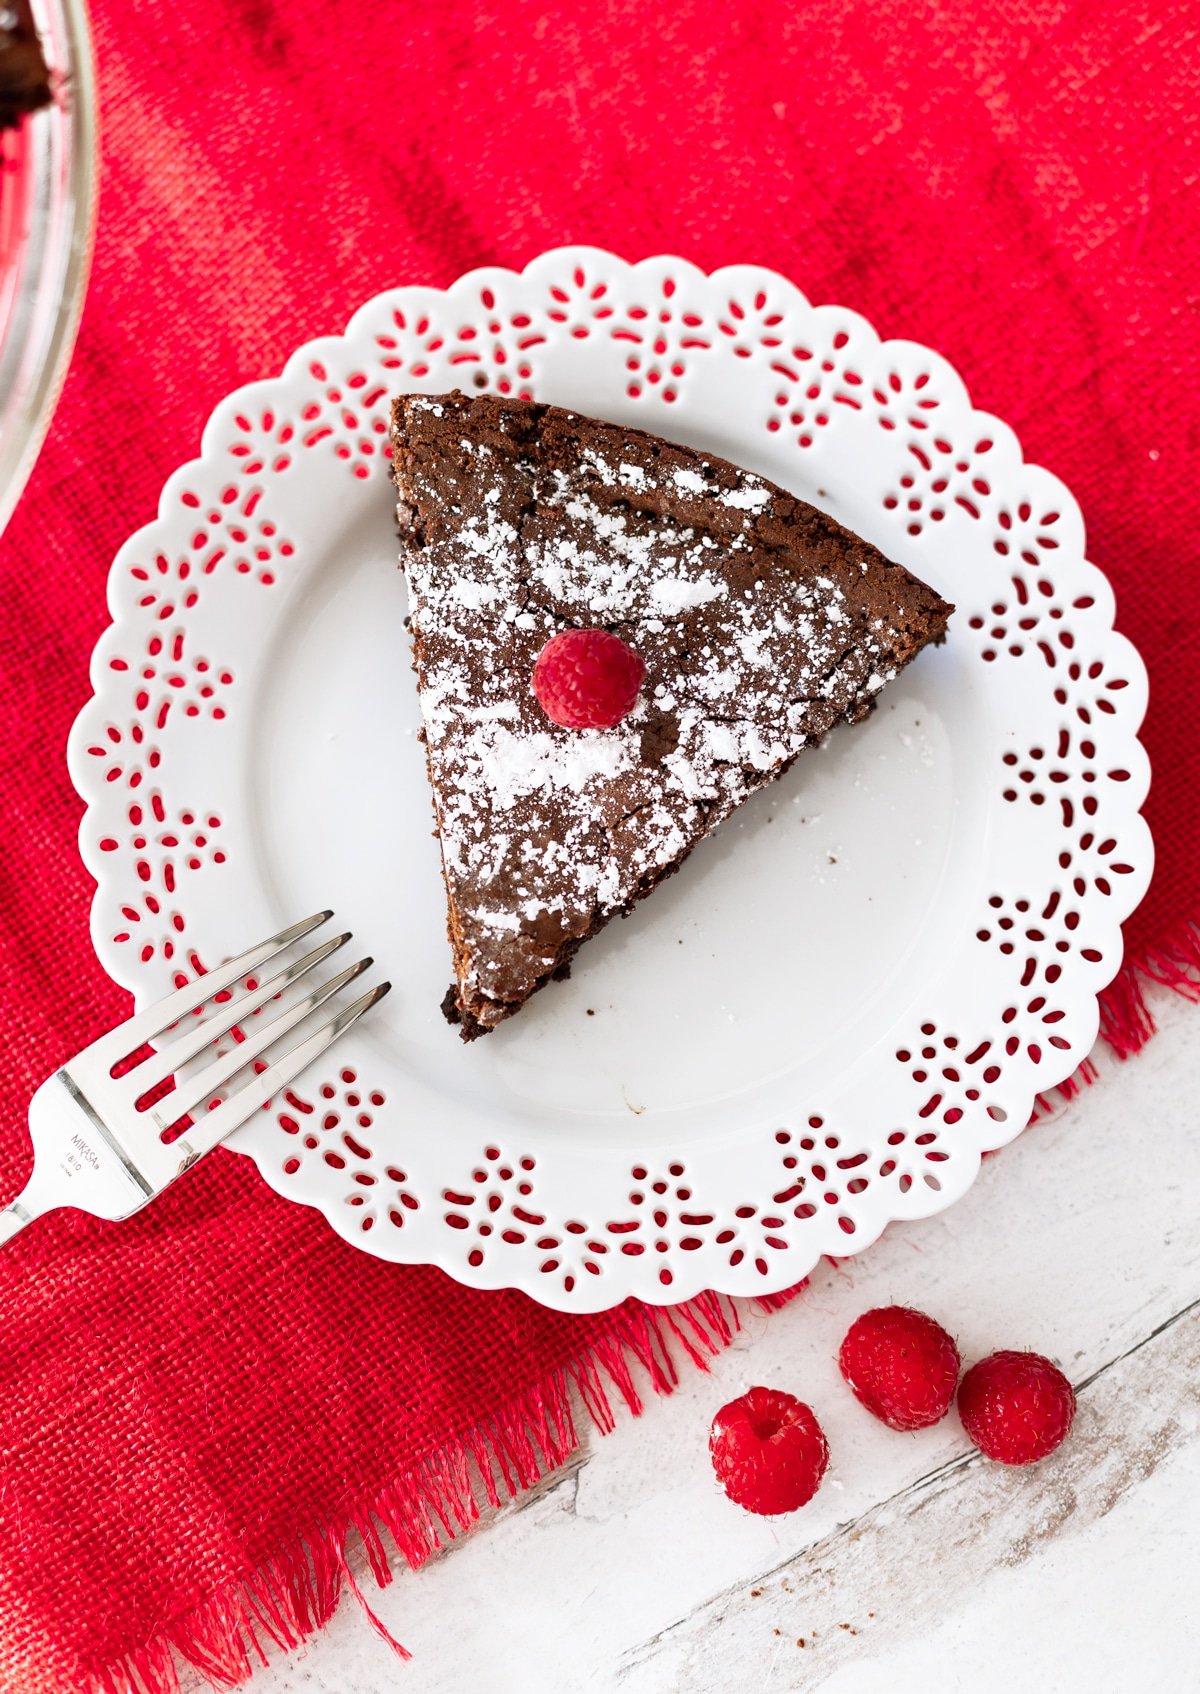 A slice of Flourless Chocolate Torte topped with powdered sugar and raspberries on a white lace plate, silver fork on side.